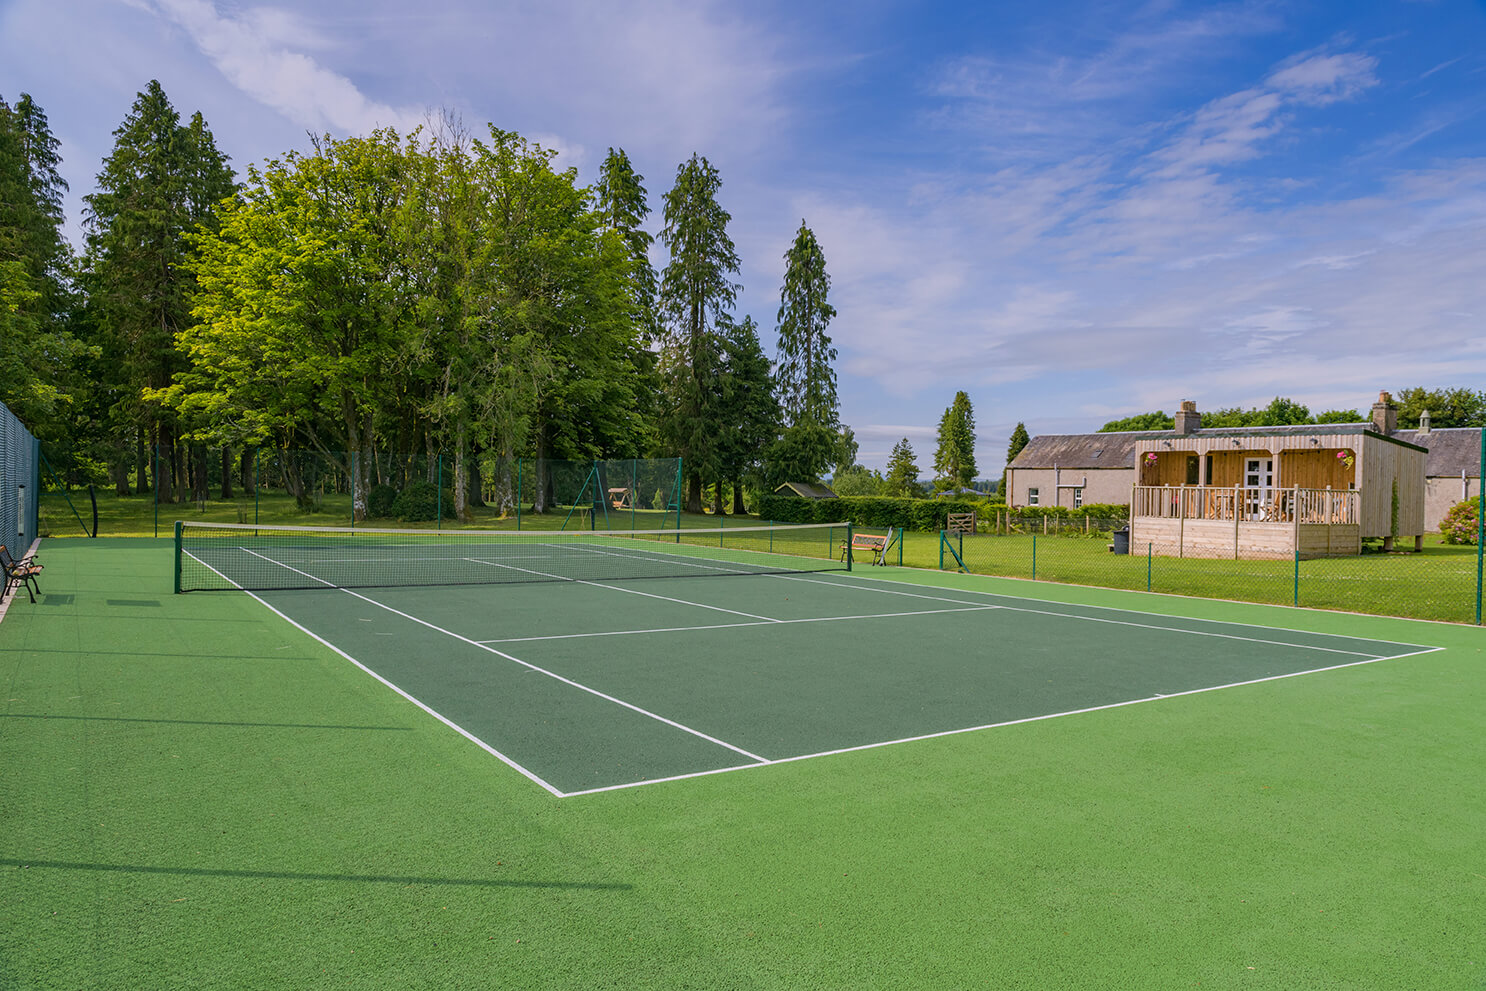 Shared use of the tennis court during your stay in our luxe holiday cottages | Logie Cottages